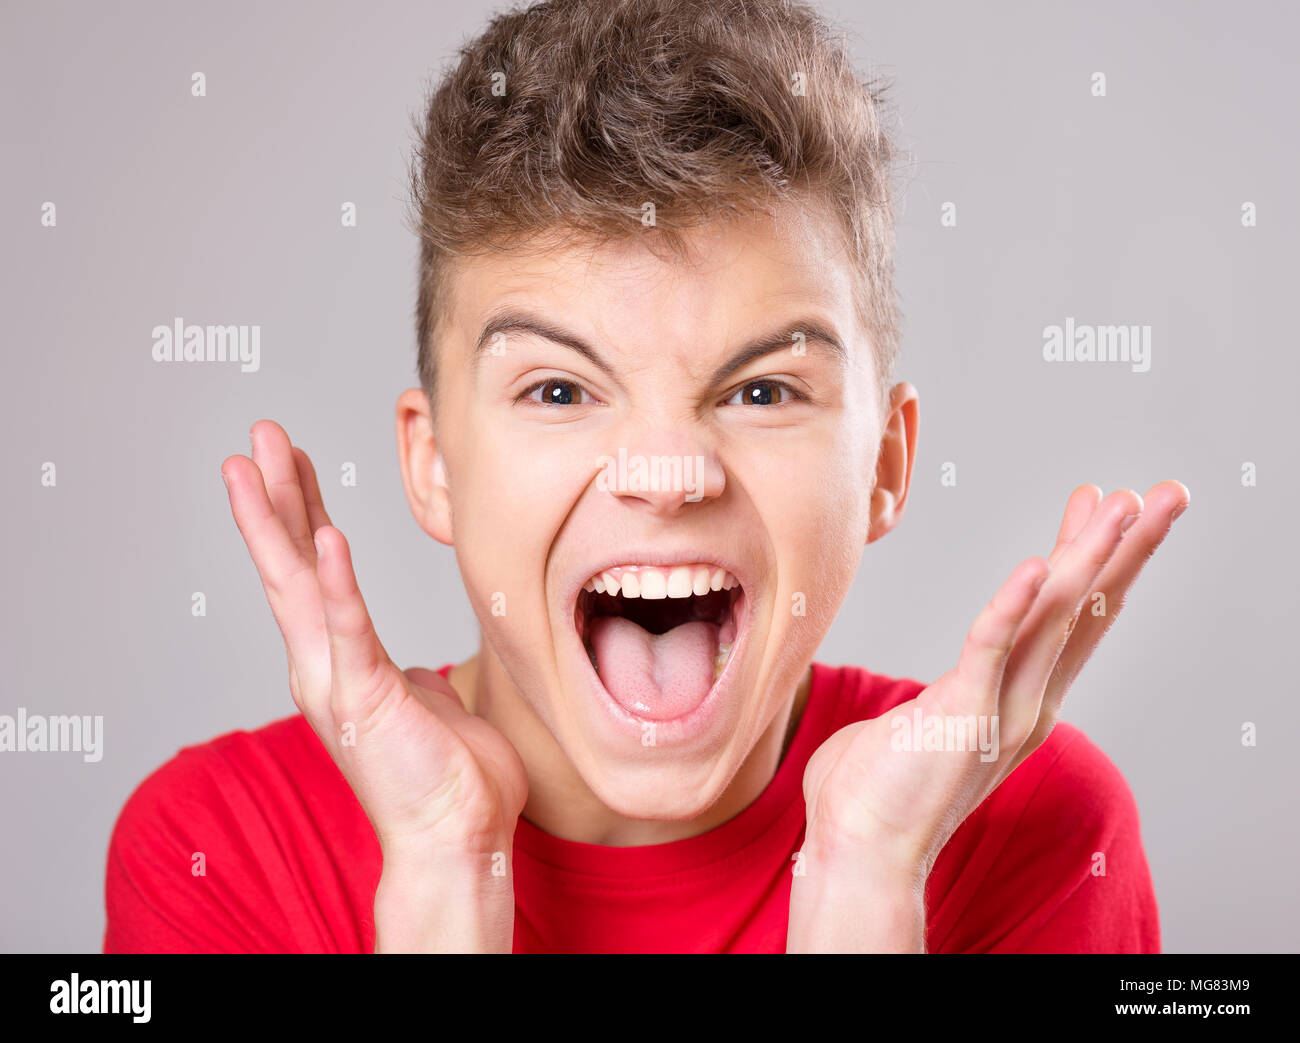 Emotional portrait of irritated shouting teen boy. Furious teenager screaming and looking with anger at camera. Handsome outraged child shouting out l Stock Photo